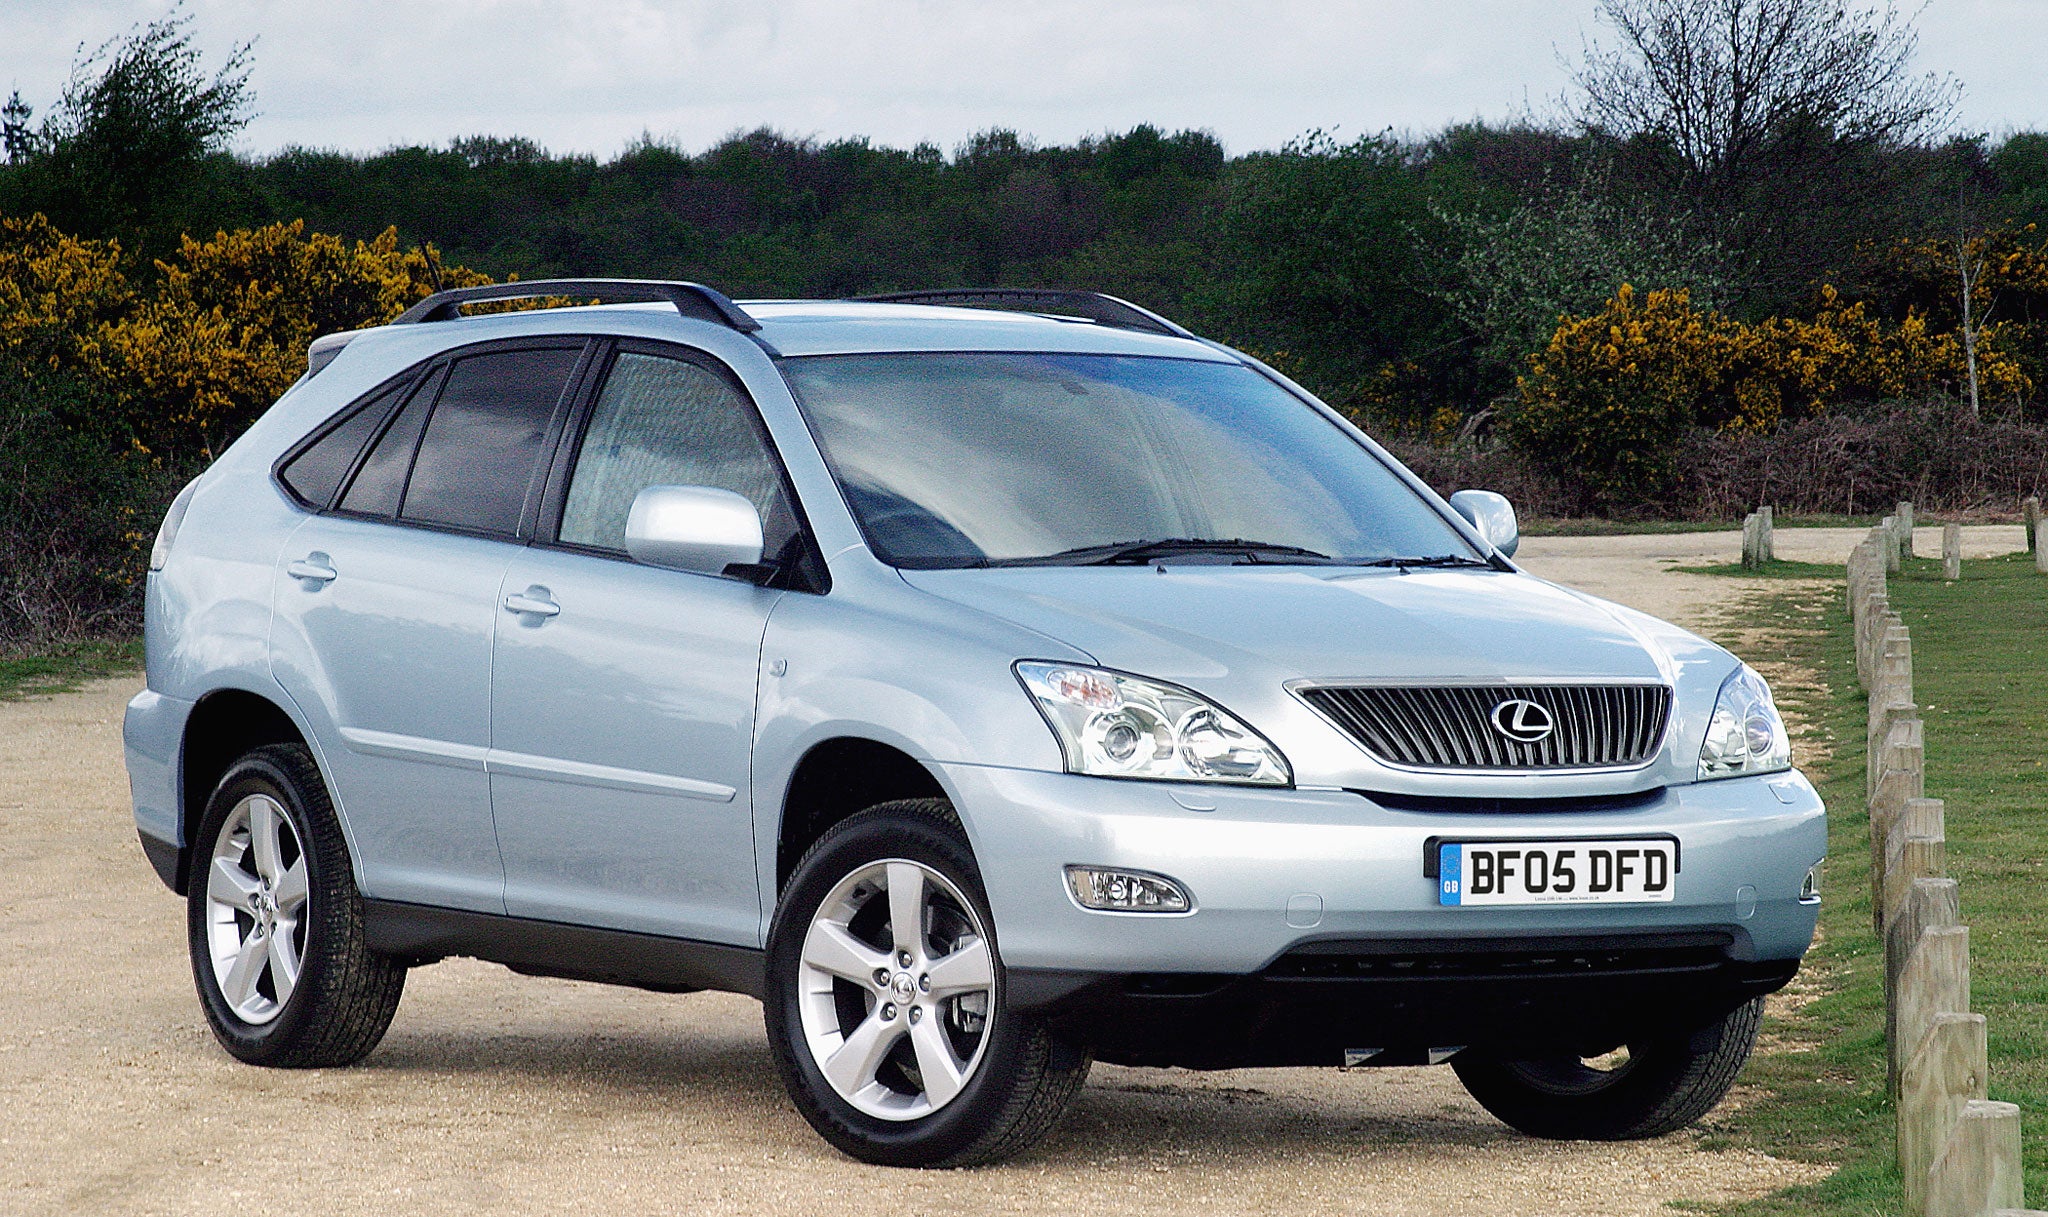 Car for the heart: The ultra-reliable Lexus RX